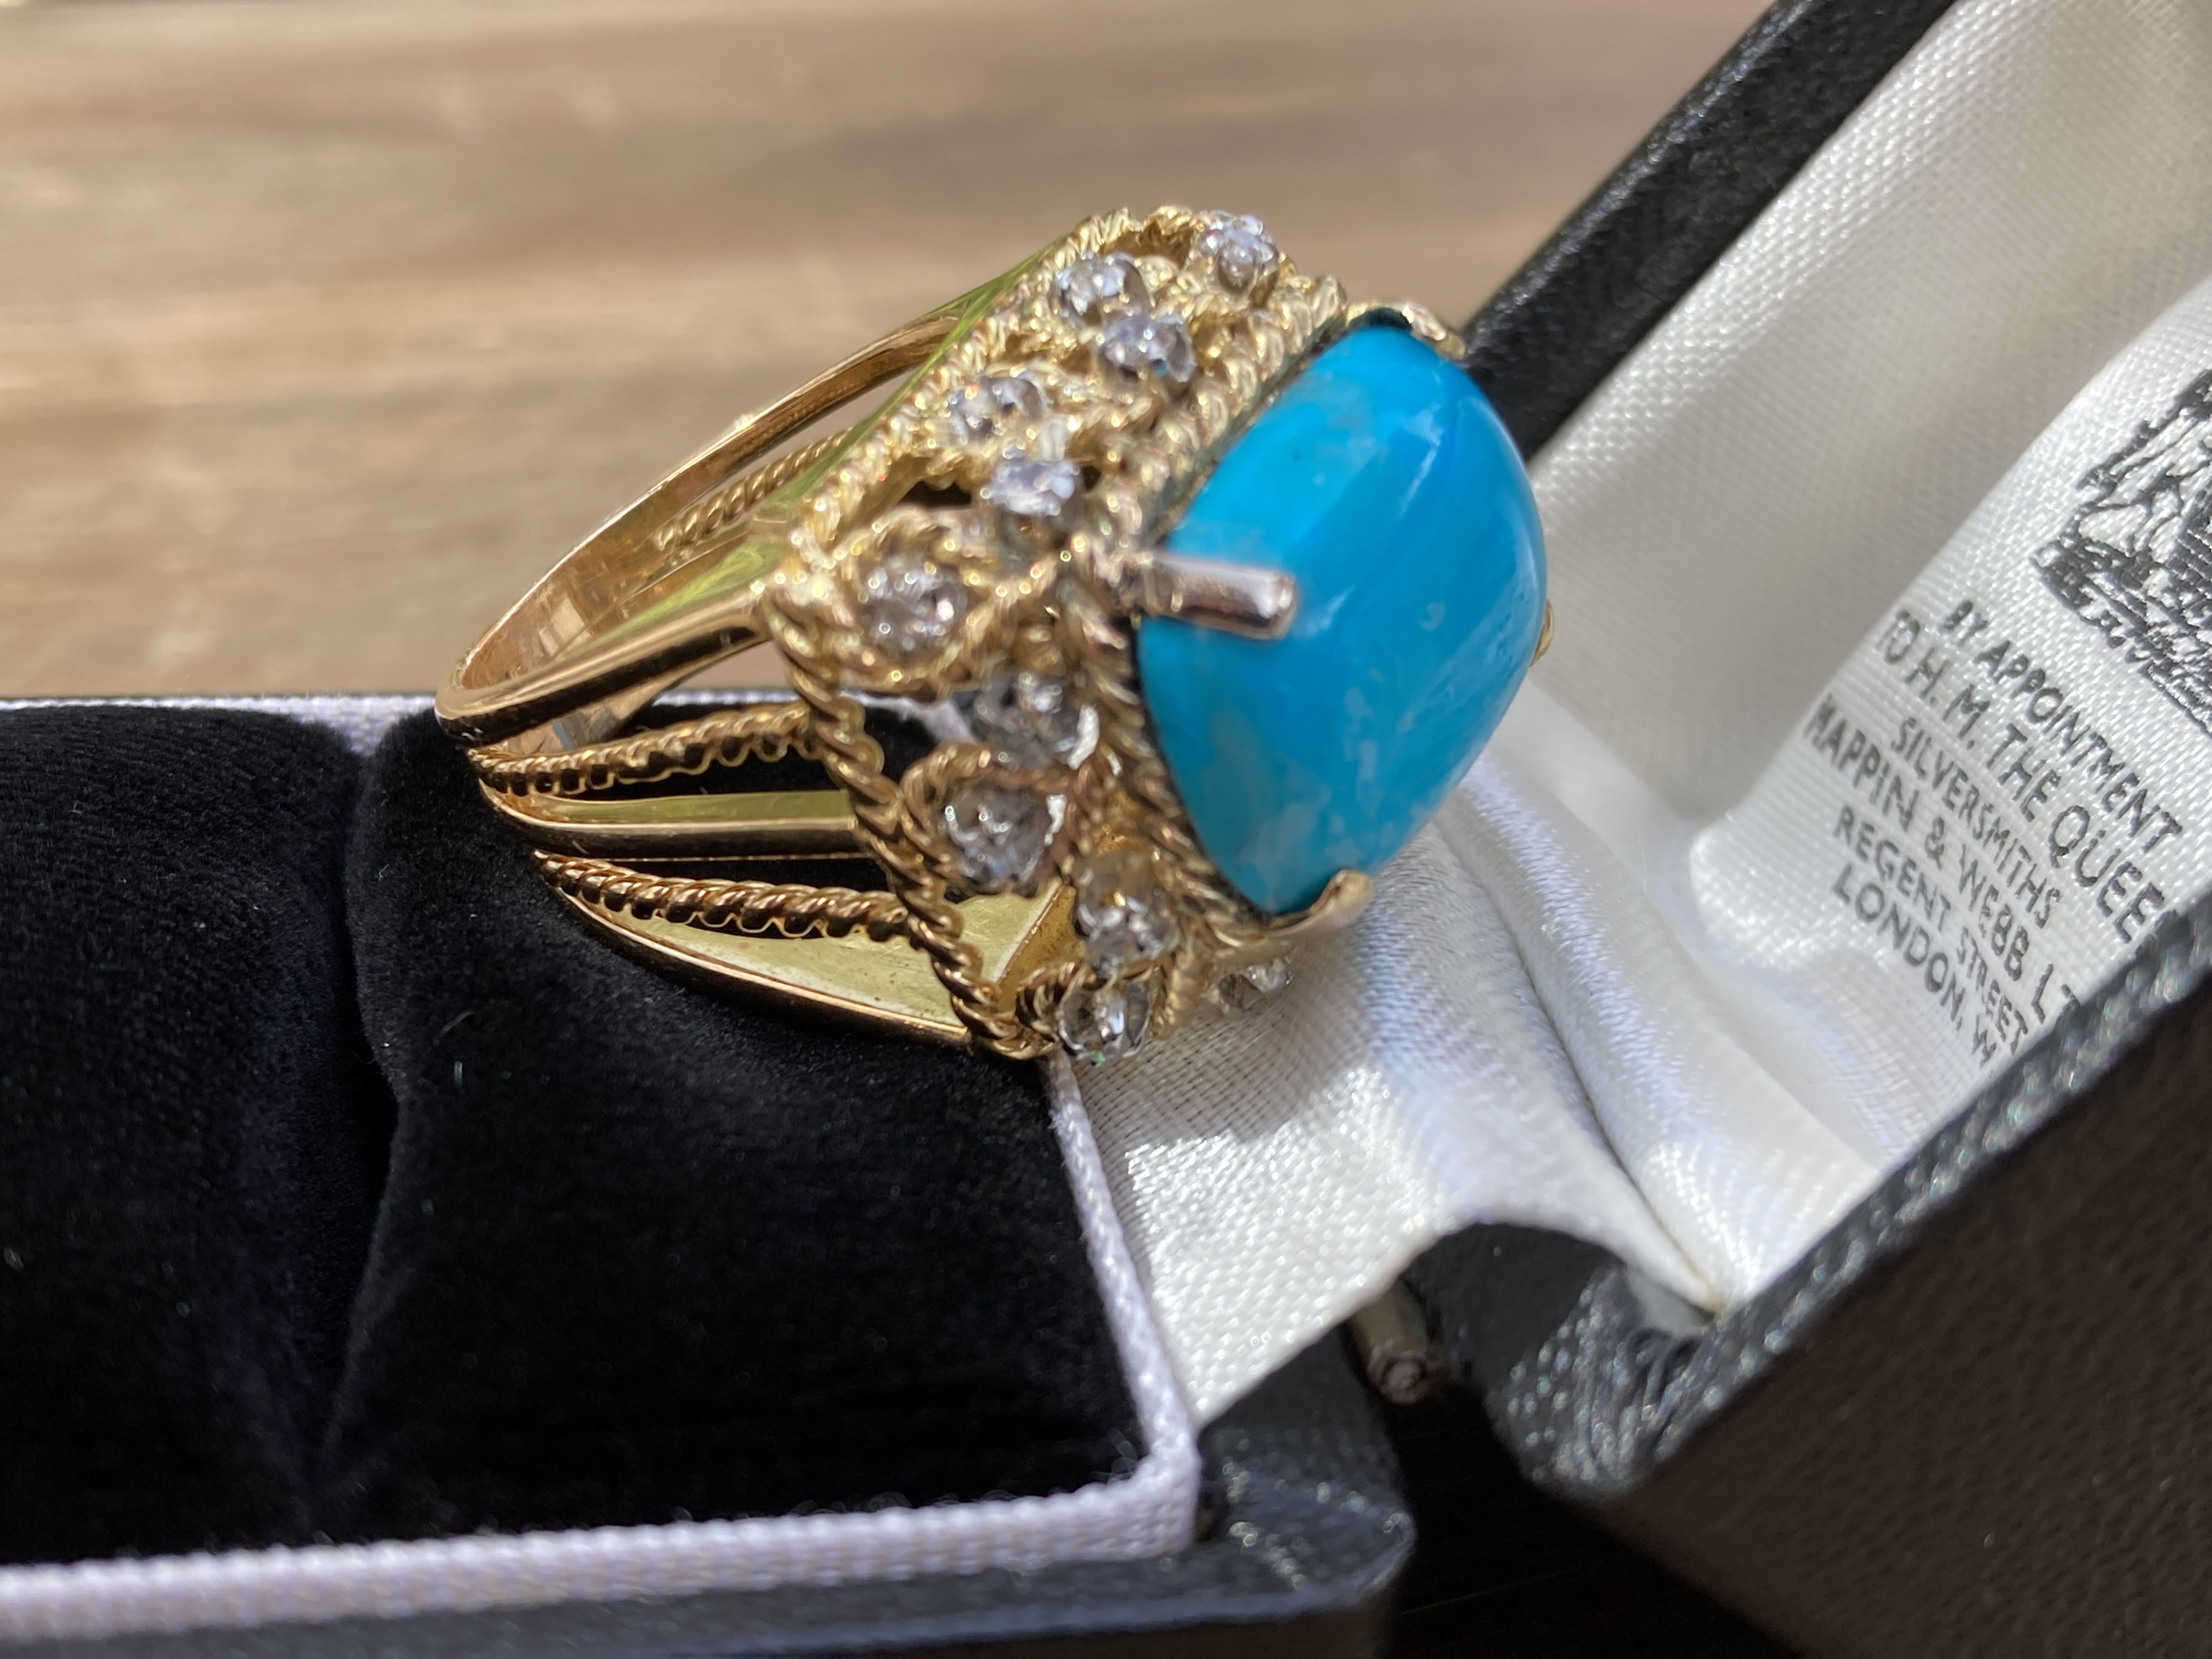 19G 18CT YELLOW GOLD TURQUOISE & DIAMOND COCKTAIL RING - Image 4 of 6